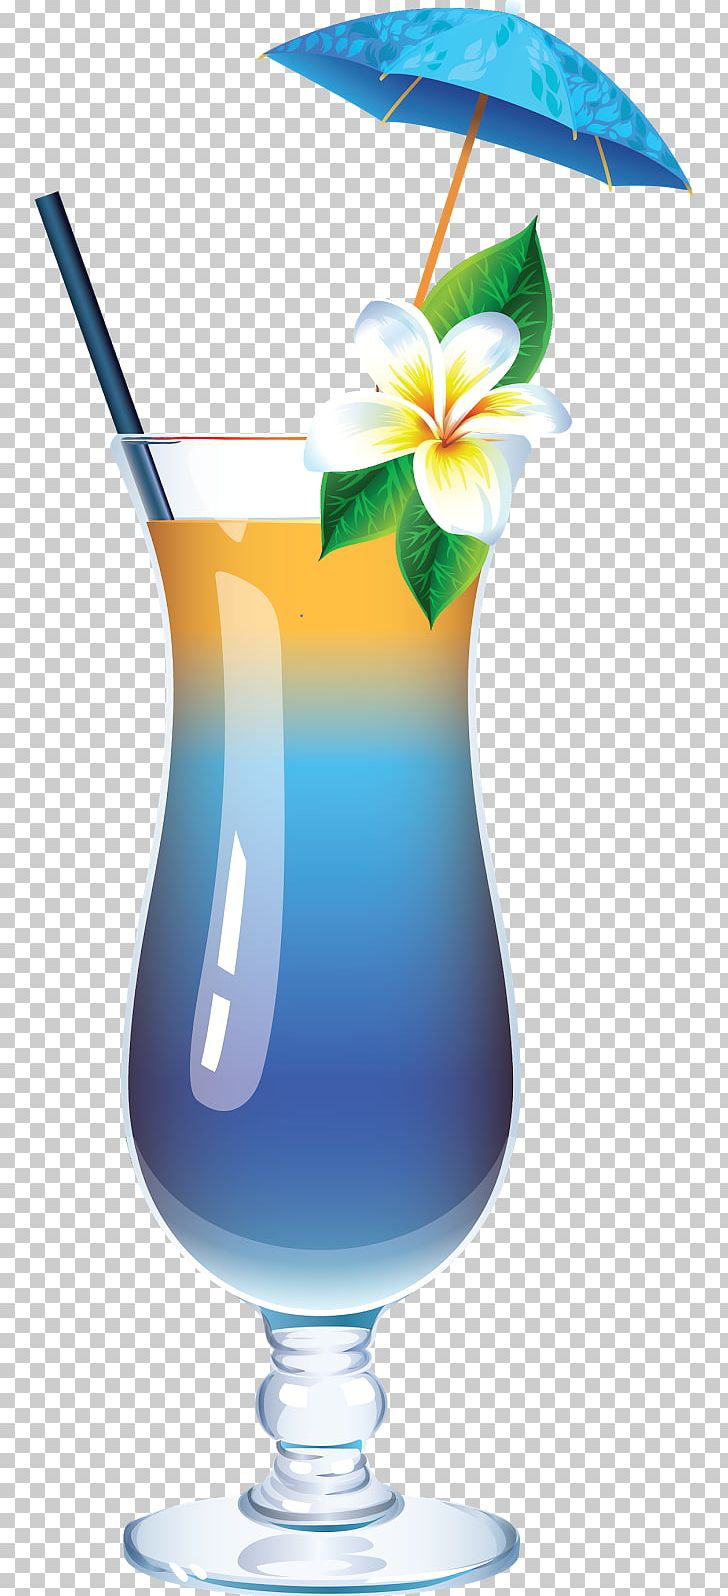 Cocktail Tequila Sunrise Martini Iced Tea Fizzy Drinks PNG, Clipart, Batida, Blue Hawaii, Blue Lagoon, Caipirinha, Cocktail Free PNG Download